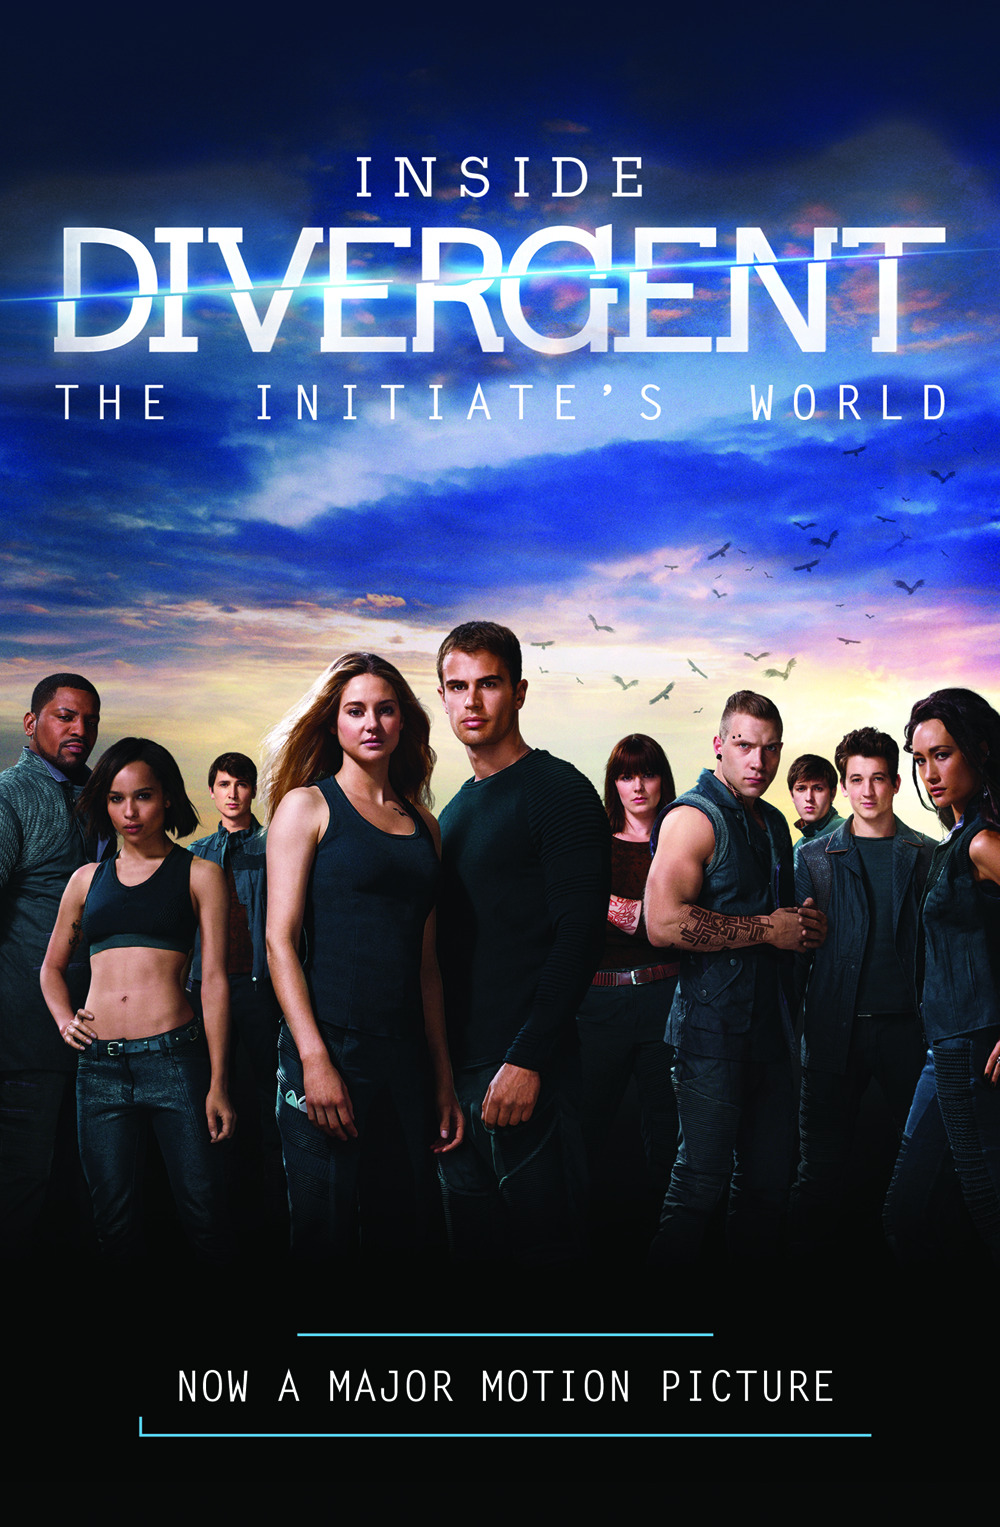 Behold! The epic cover for INSIDE DIVERGENT: THE INITIATE’S WORLD. More than 150 photographs! Details on everything Dauntless! On sale February 11, 2014! Gorgeous cast members together! Can you tell we’re a little excited?